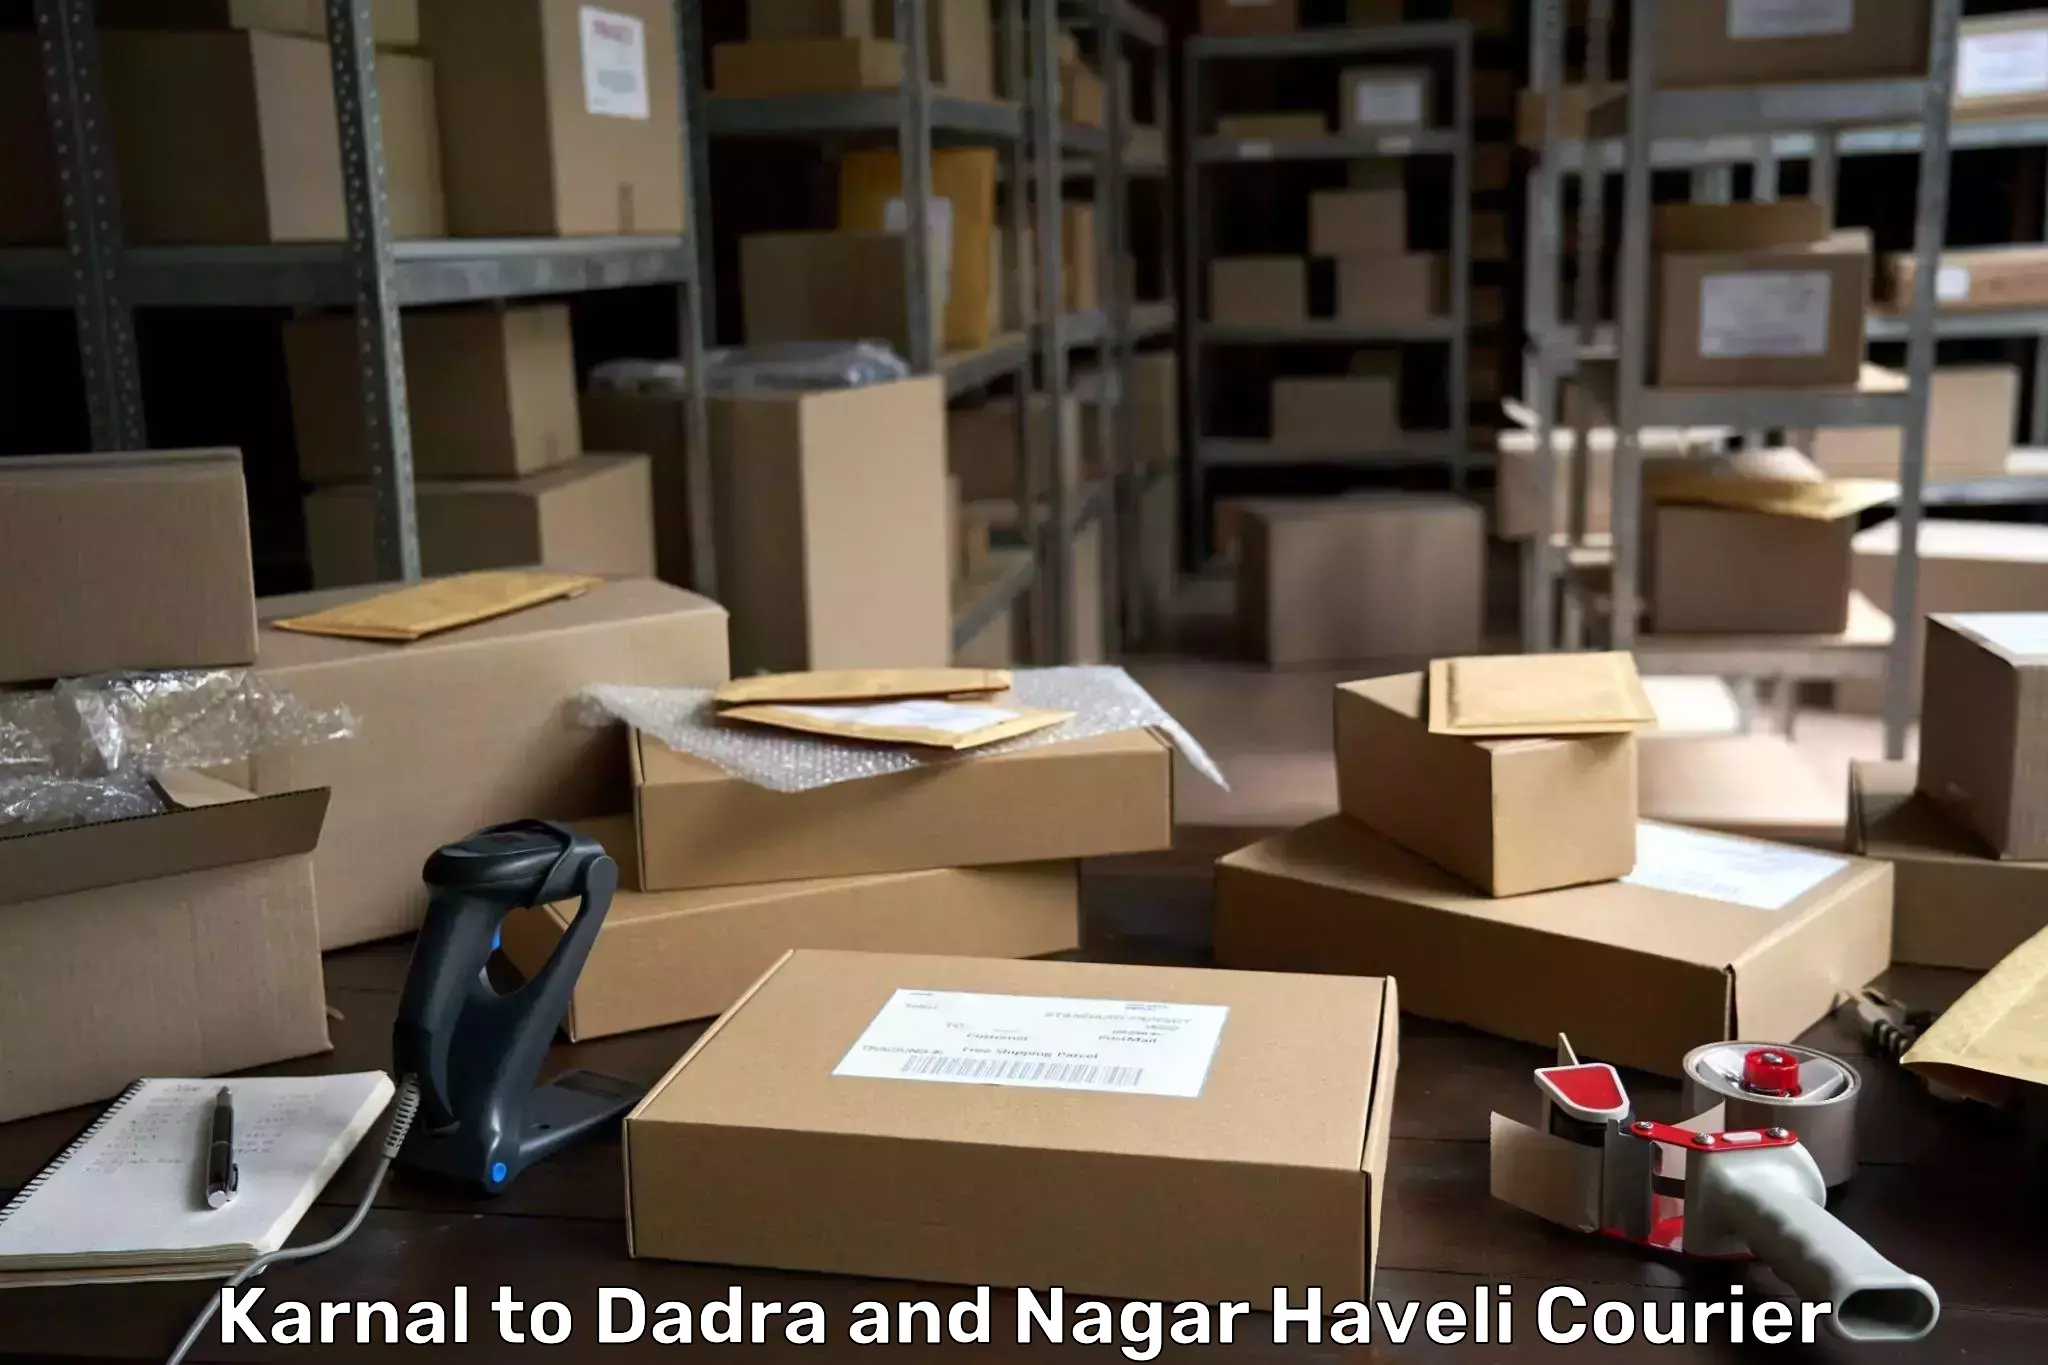 Automated parcel services Karnal to Dadra and Nagar Haveli